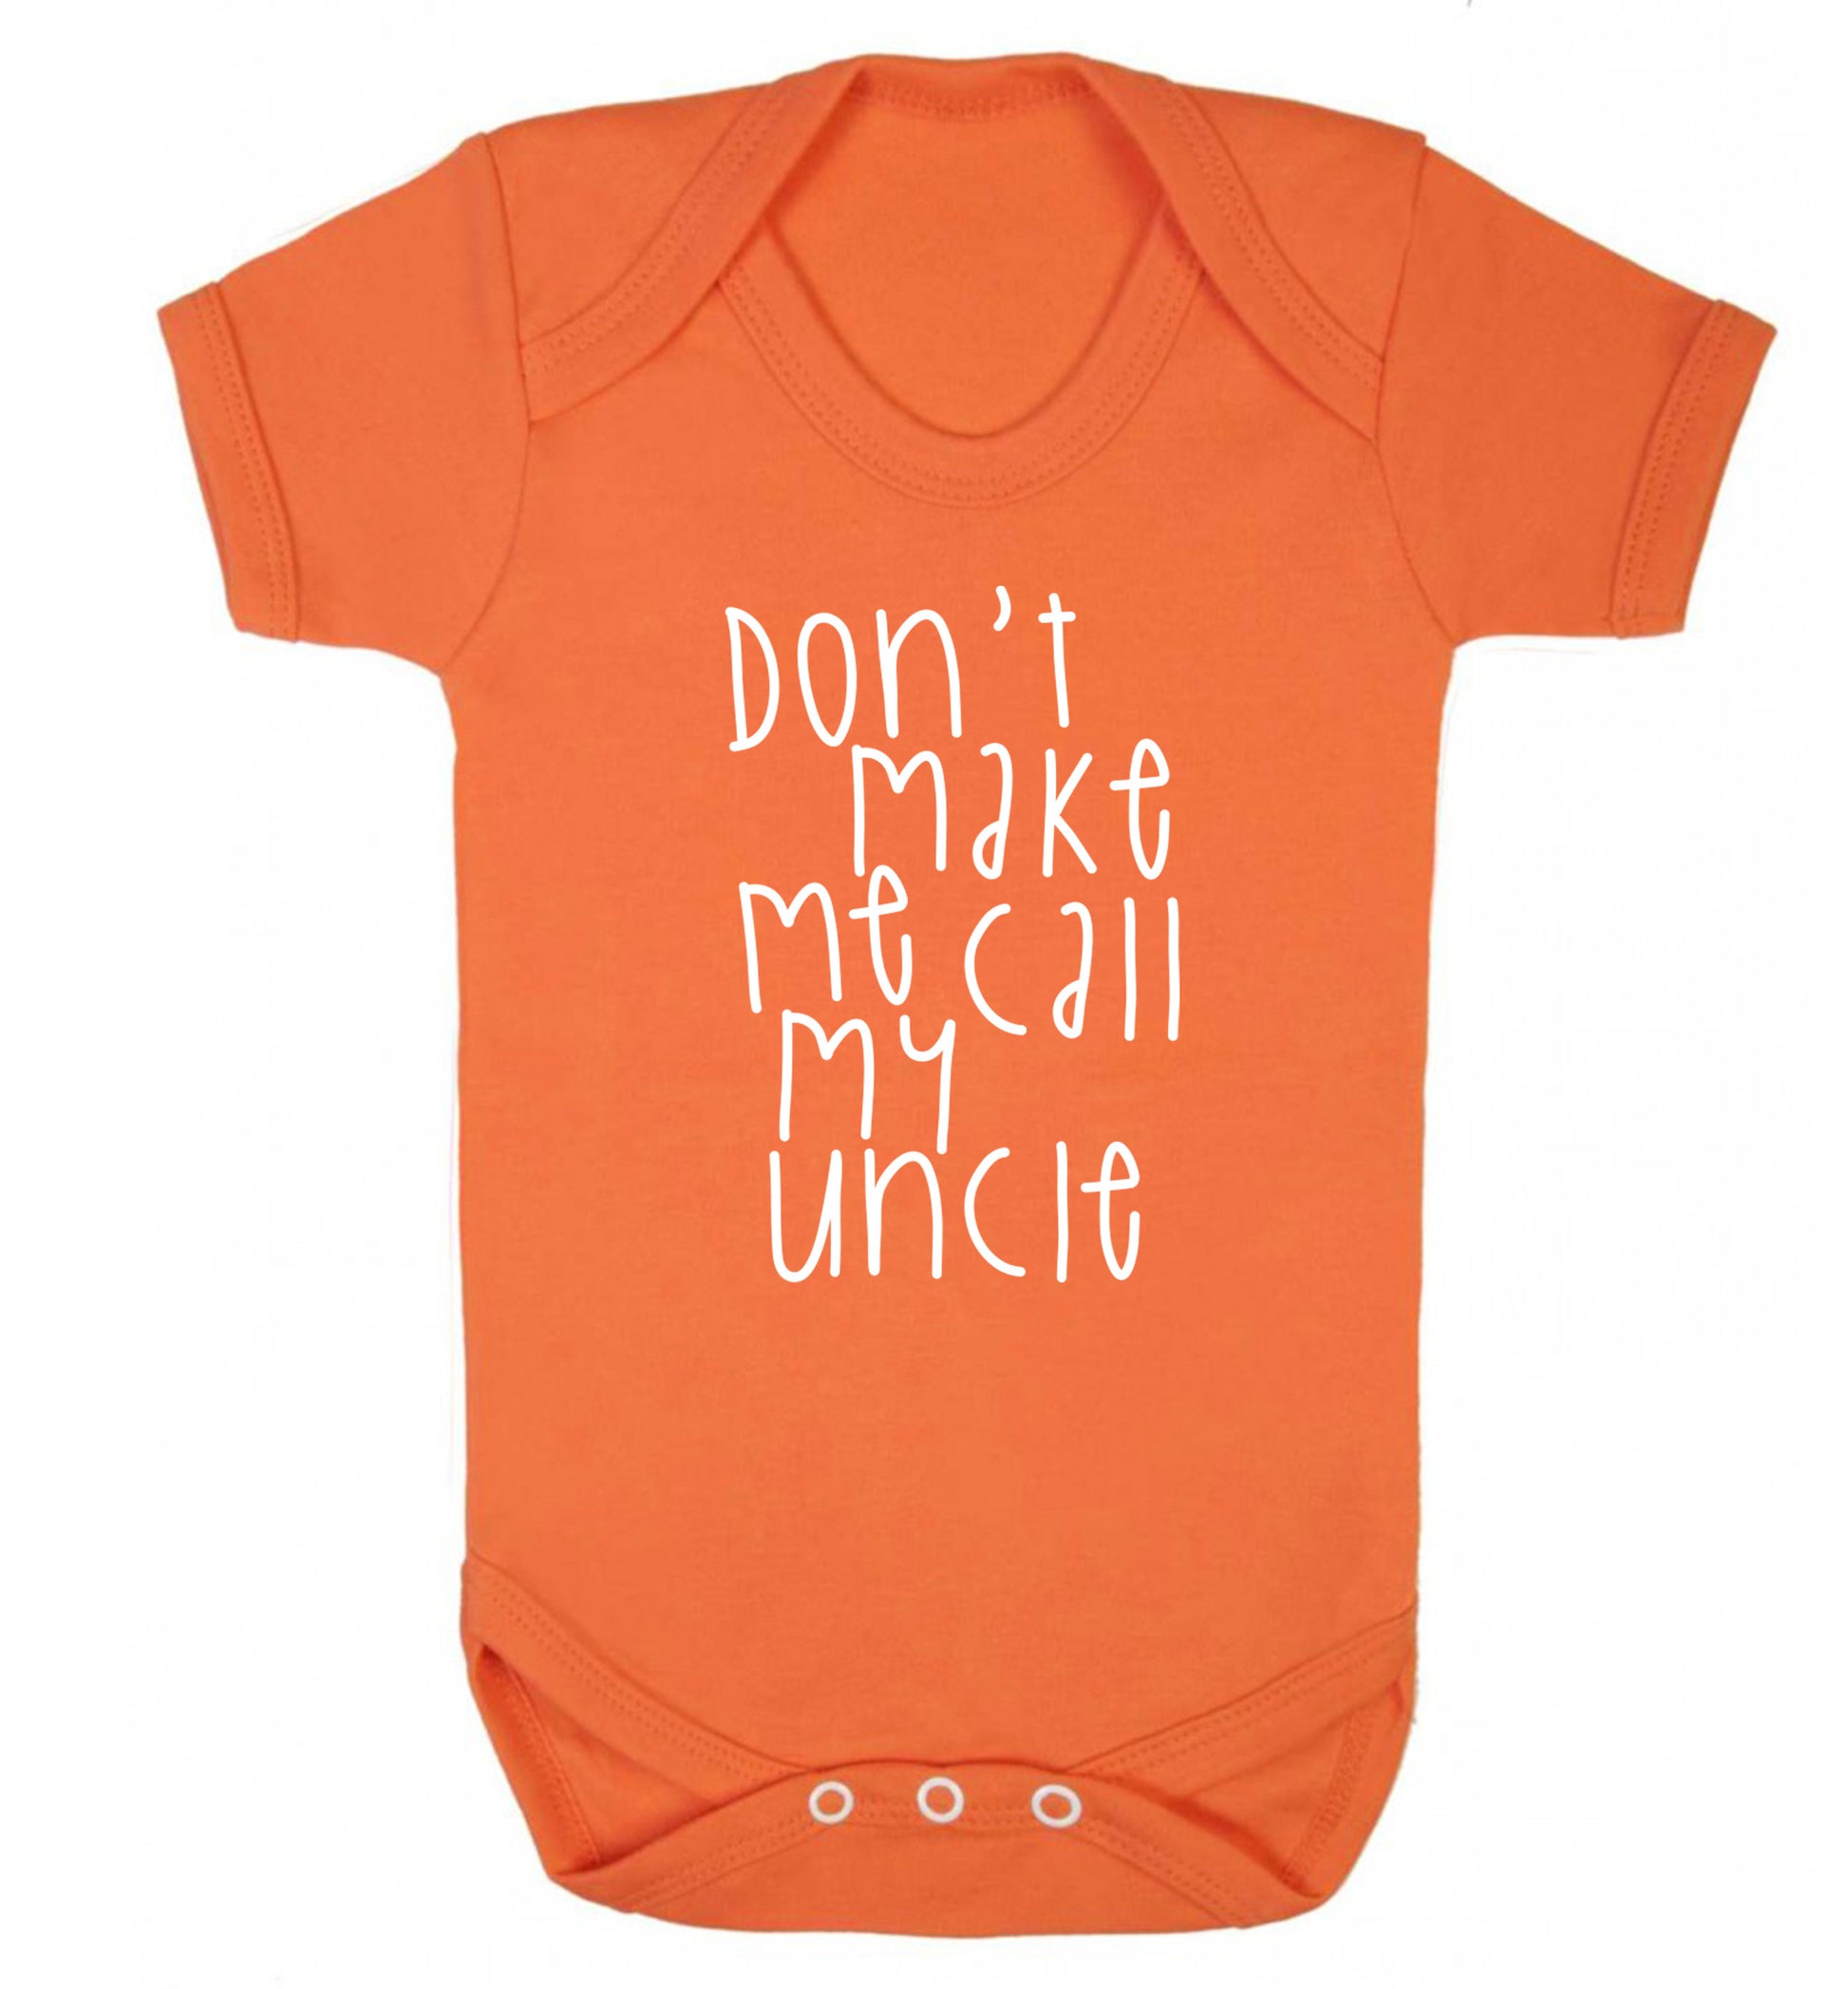 Don't make me call my uncle Baby Vest orange 18-24 months